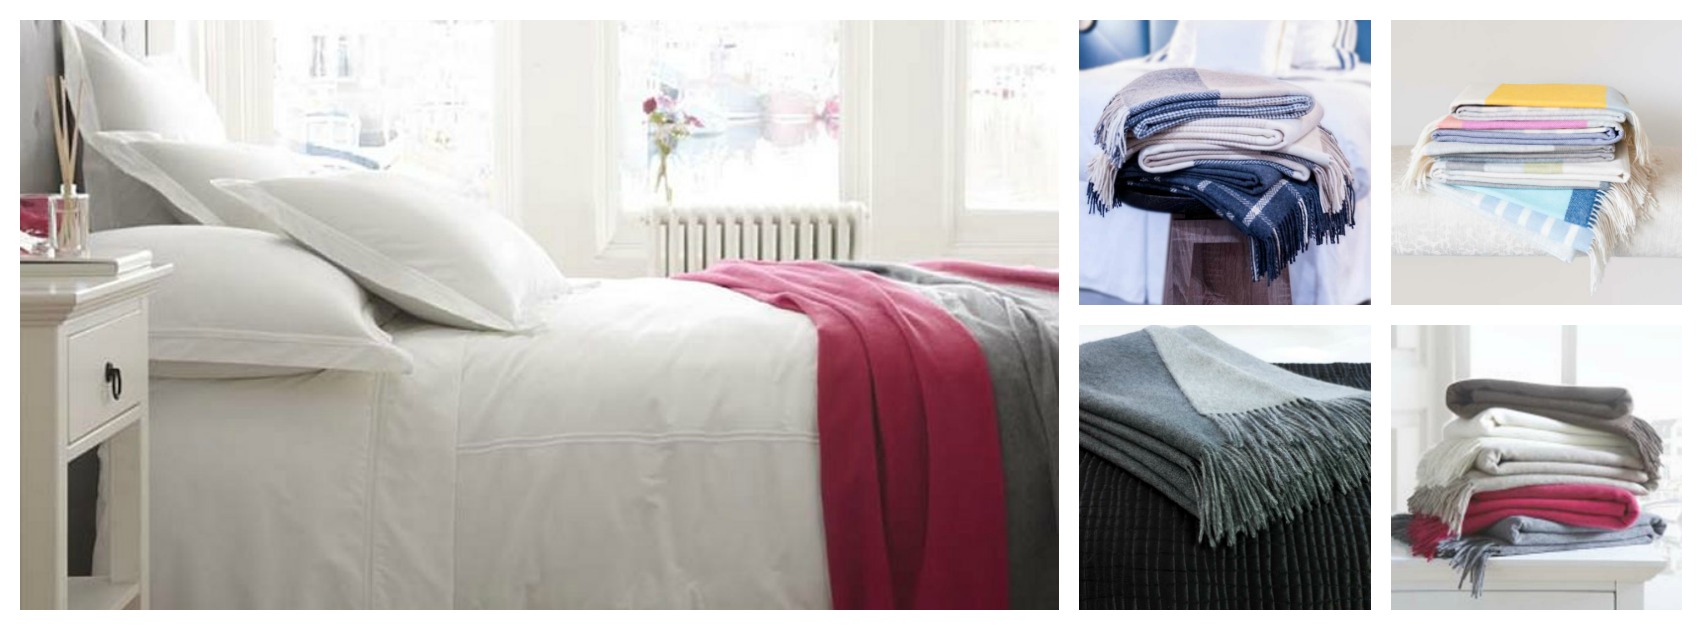 Snuggle up in gorgeous throws or blankets from The Fine Cotton Company www.thefinecottoncompany.com 